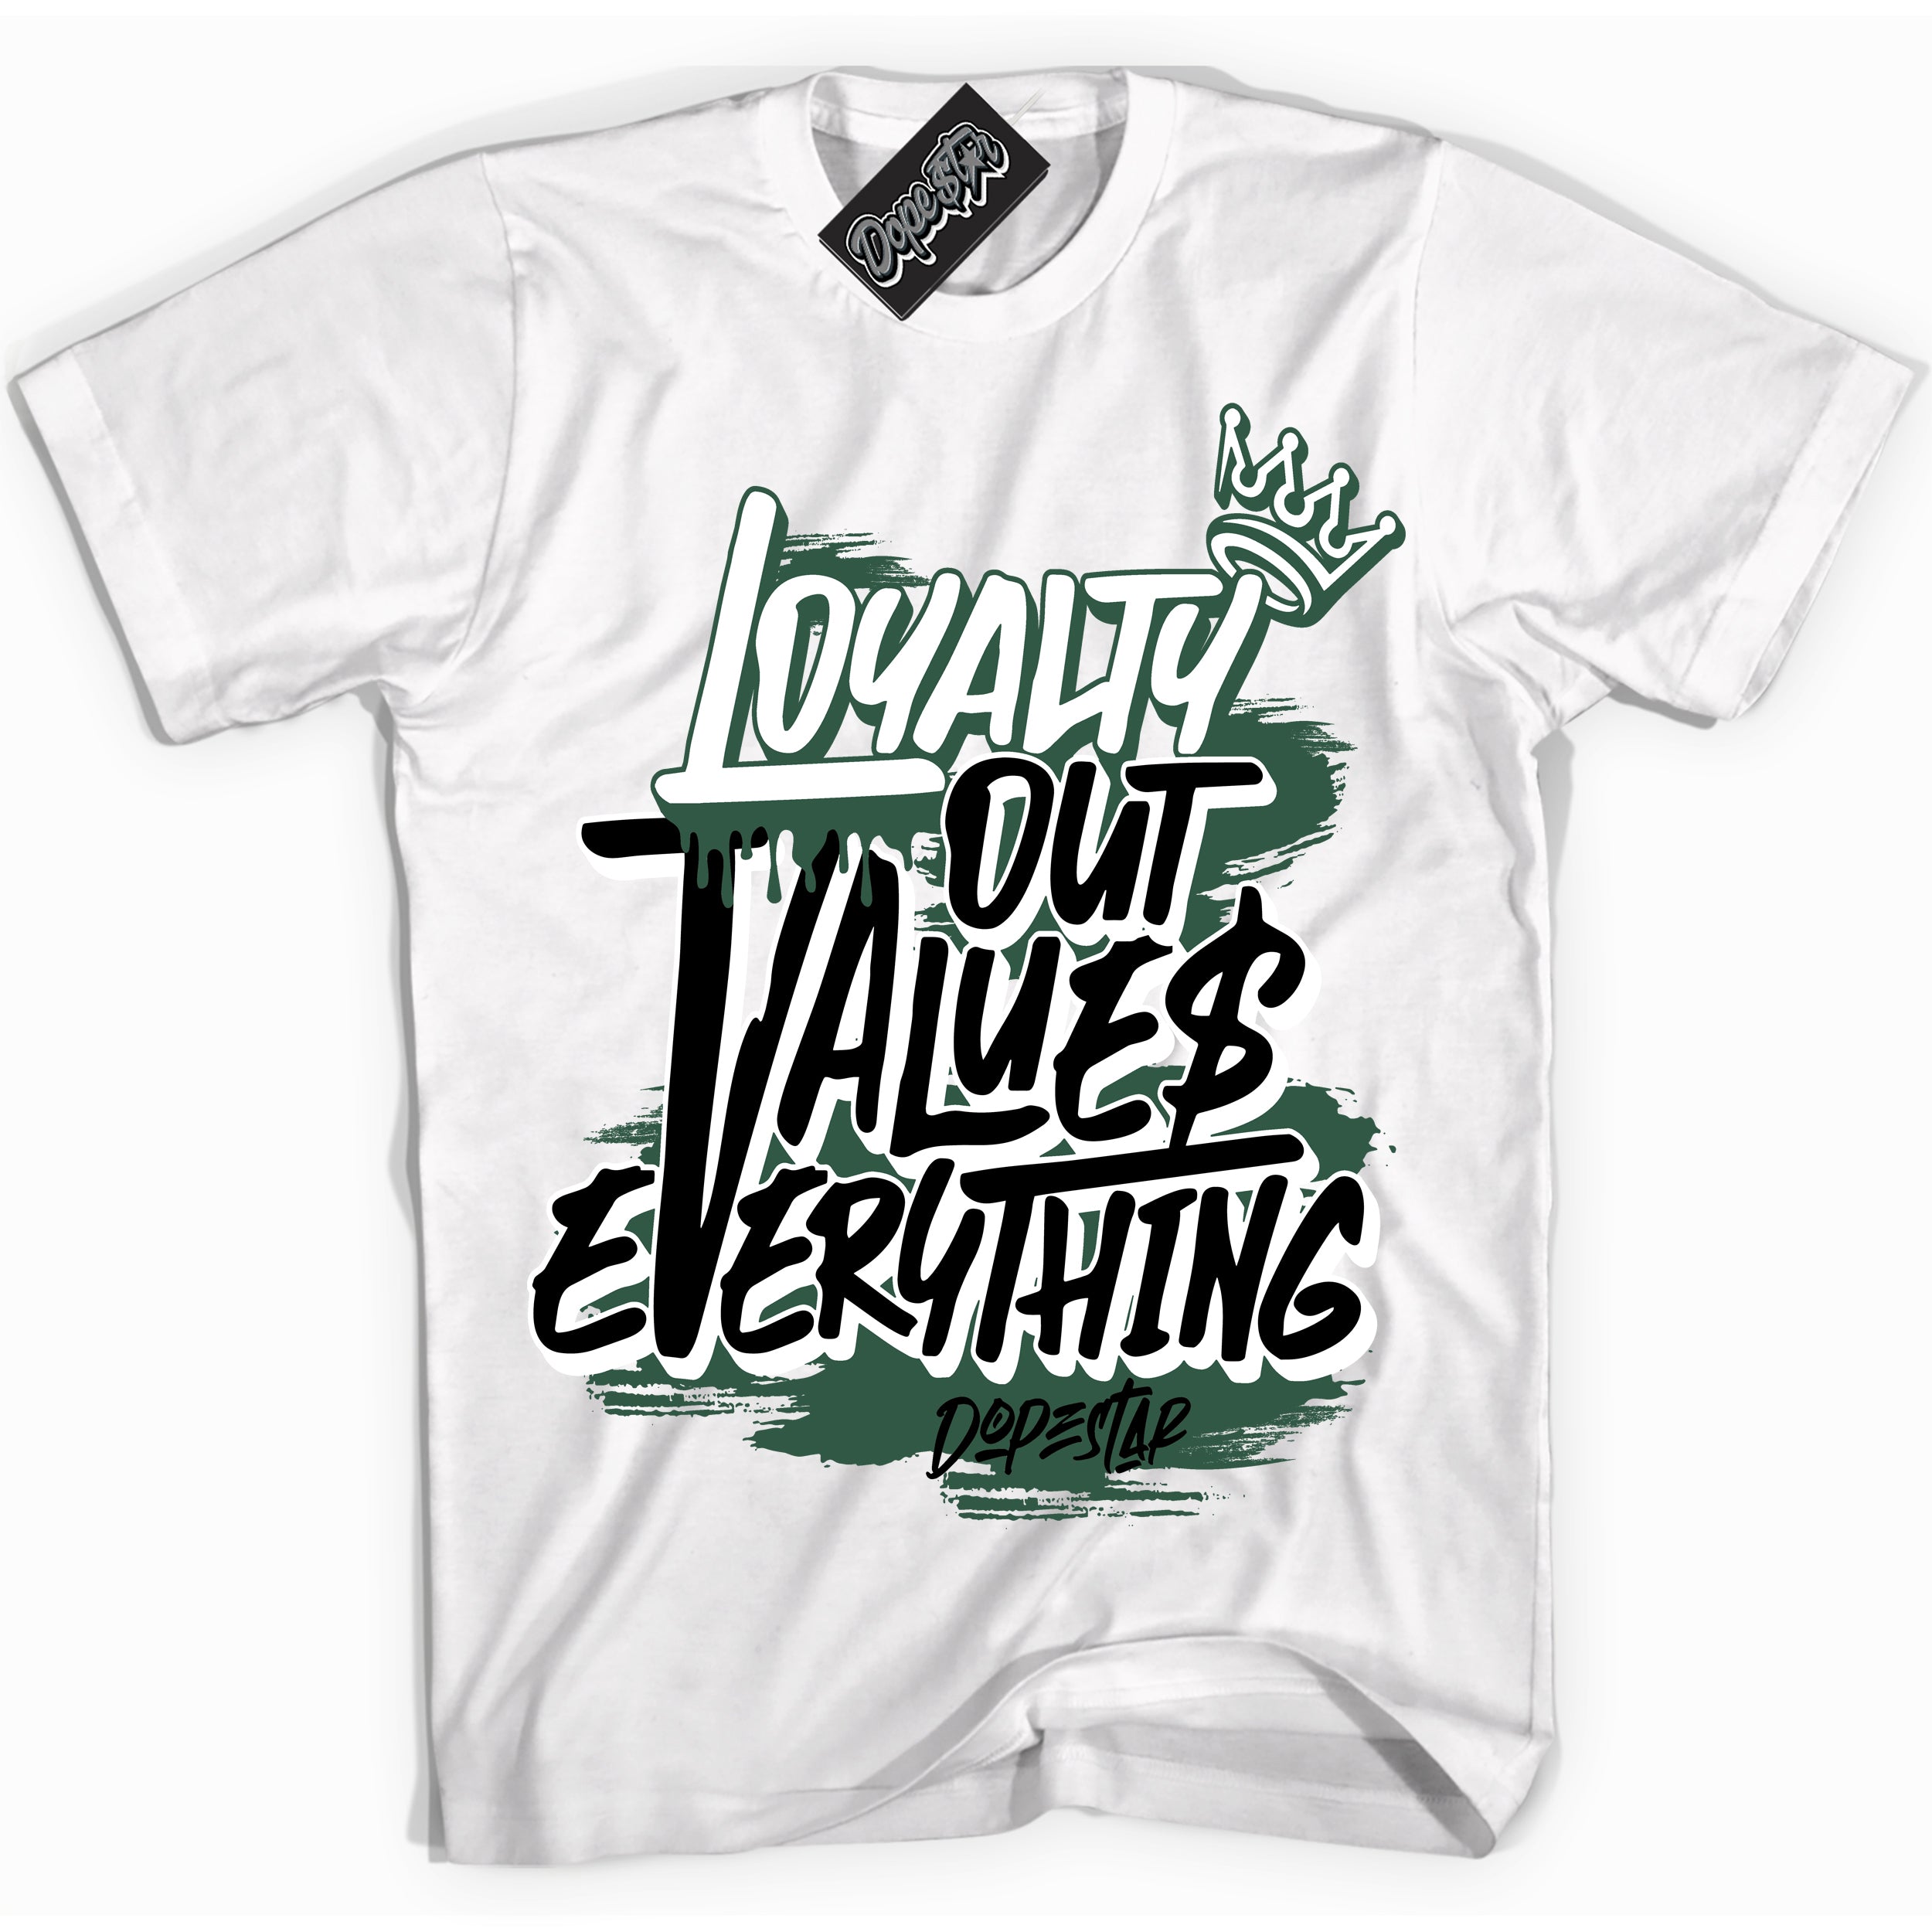 Cool White Shirt with “ Loyalty Out Values Everything” design that perfectly matches Golf Noble Green 1s Sneakers.